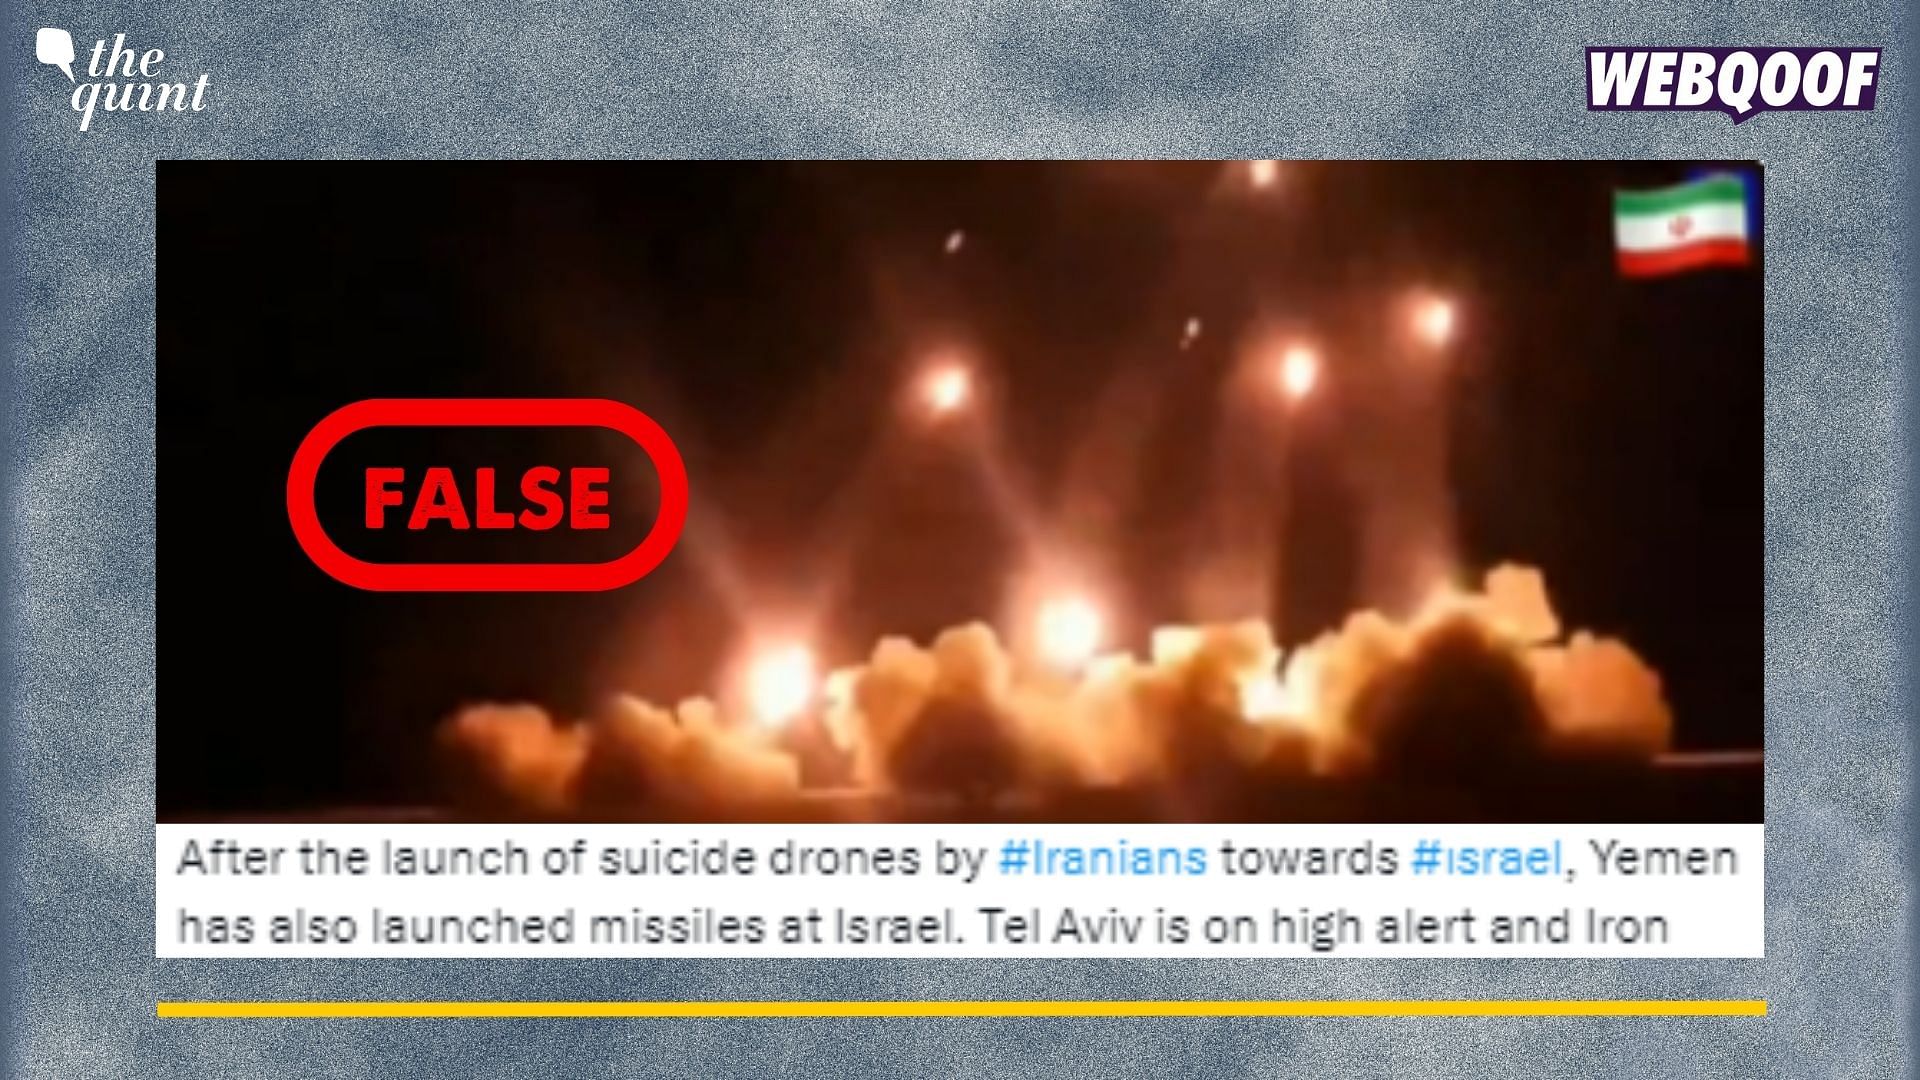 Old Video Shared to Falsely Claim That Yemen Attacked Israel in Air Strikes